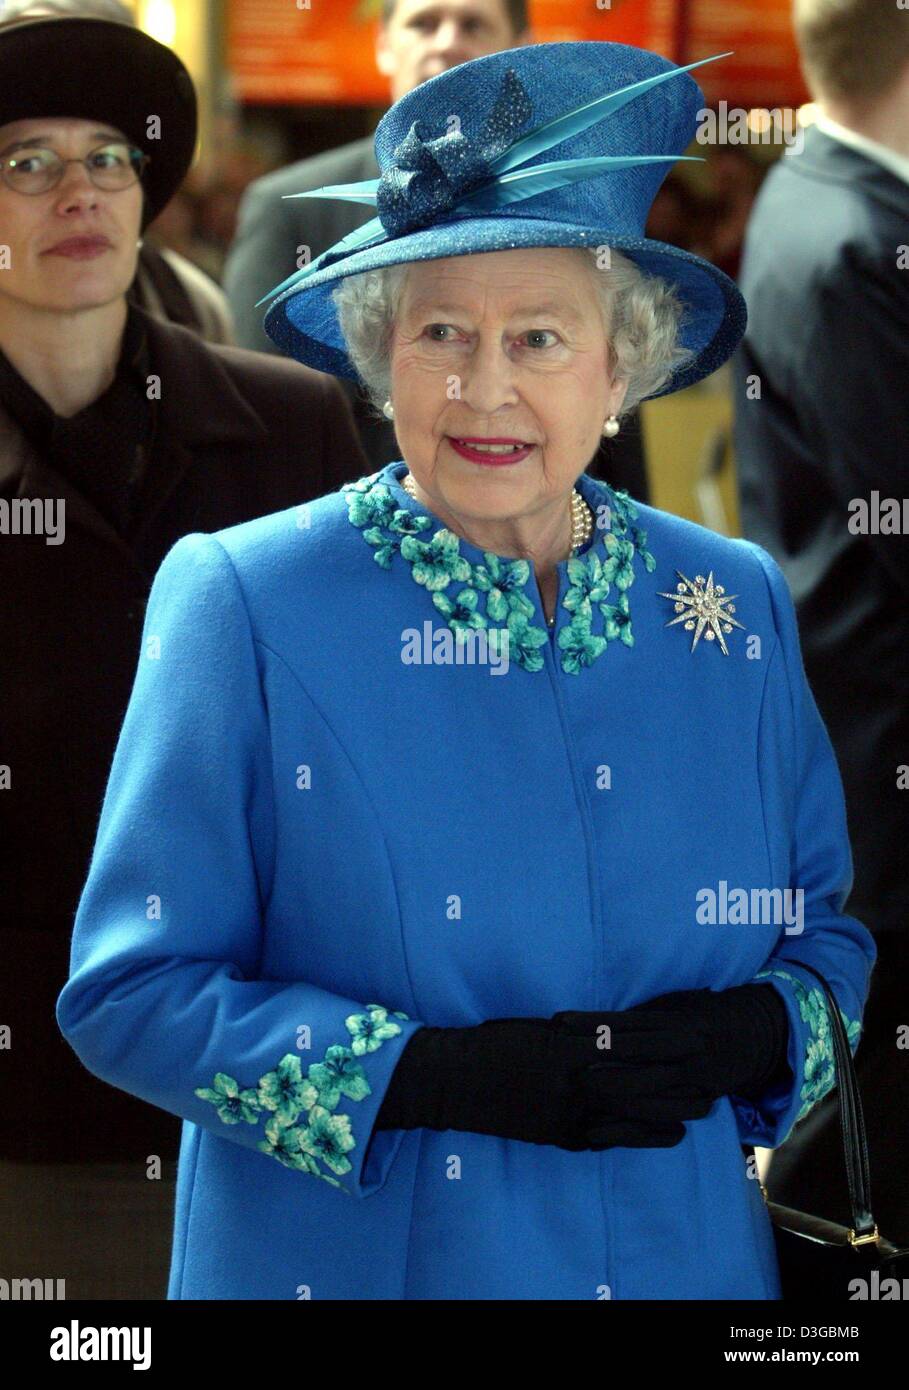 (dpa) - Her Majesty the Queen walks through the main train station in Potsdam, Germany, 3 November 2004. The Queen visits the German states of Berlin, Brandenburg and North Rhine Westphalia between 2 and 4 November 2004. It is the fourth state visit to Germany by the 78-year-old Queen. Stock Photo